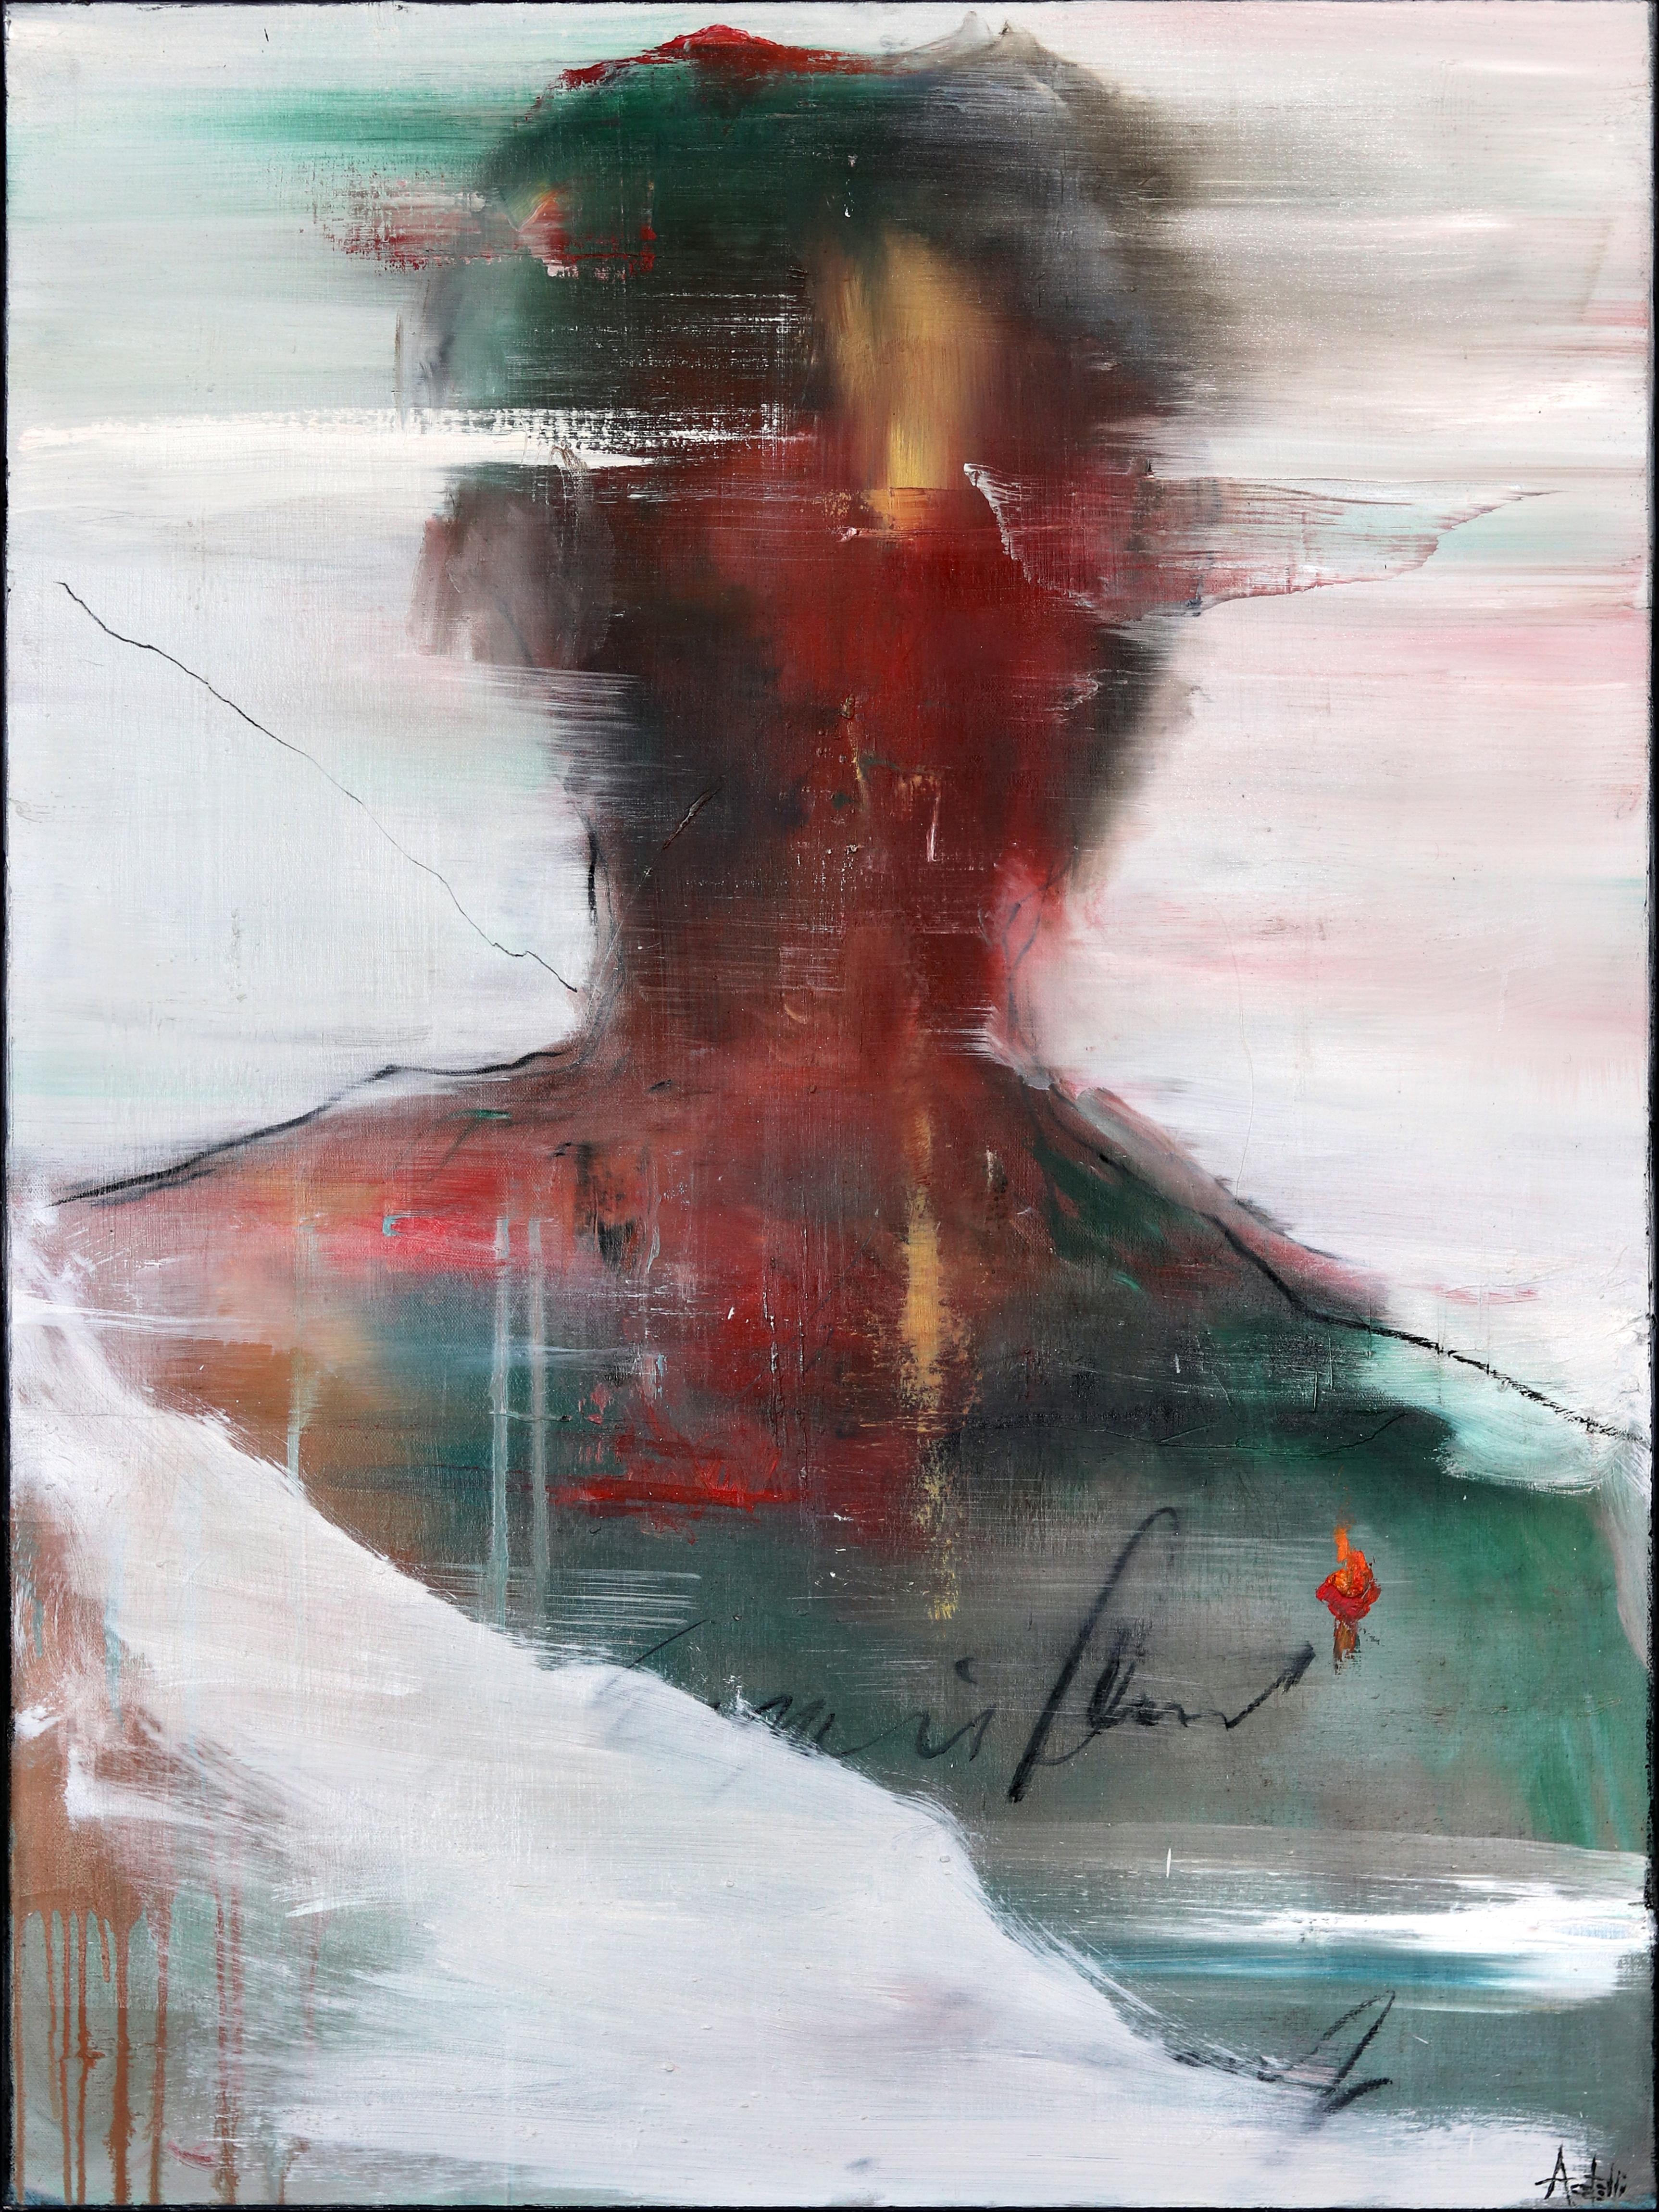 Lorenzo  - Original Oil on Canvas Abstract Figurative Painting - Mixed Media Art by Mark Acetelli